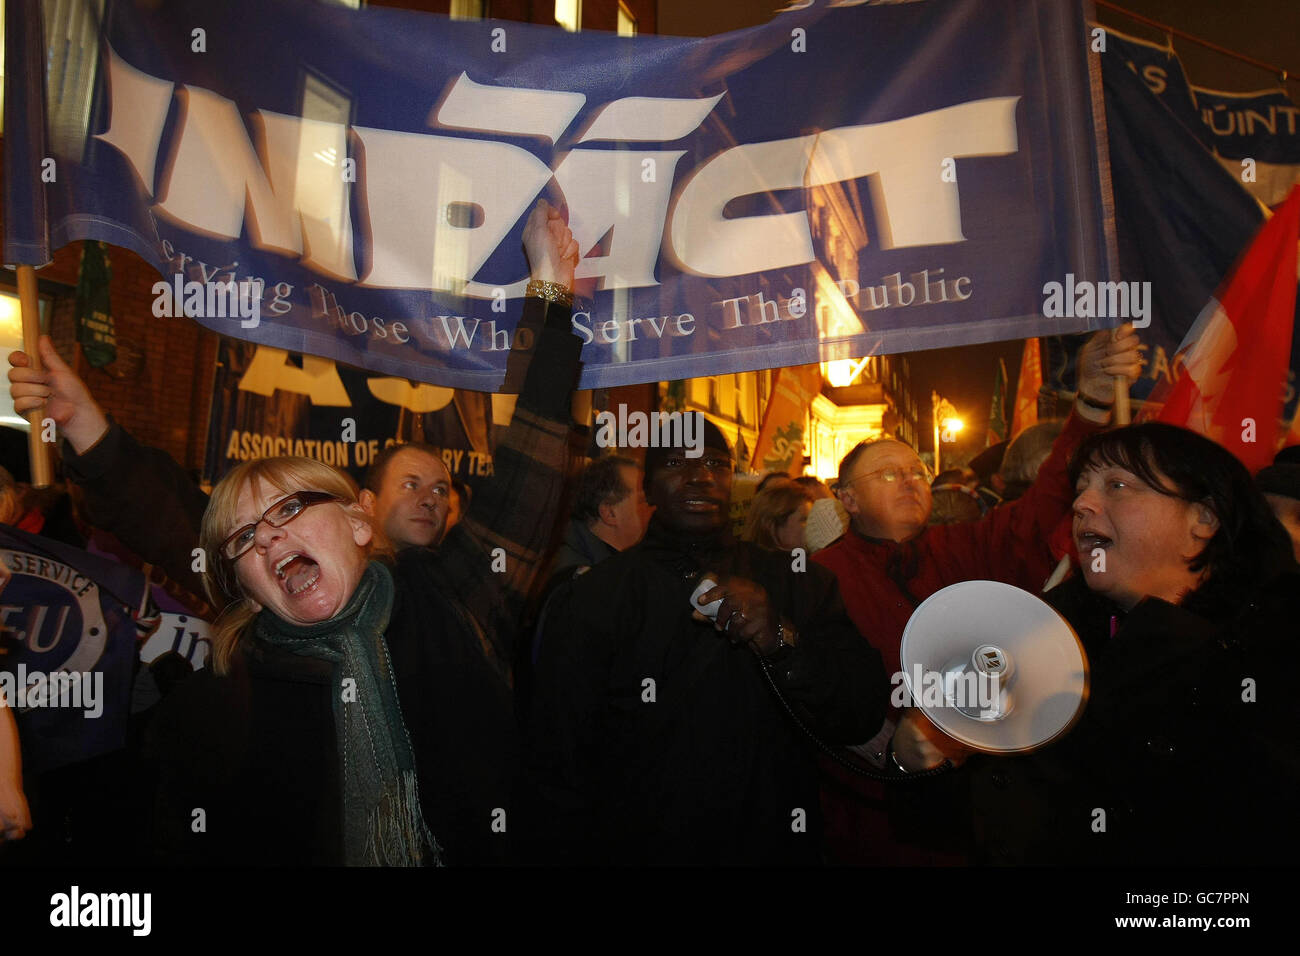 Hundreds of Public sector workers protest about wage cuts on Dublins Molesworth Street tonight. Around 600 people protested outside the Dail as TDs inside the Chamber prepared to slash their wages by up to 15%. Stock Photo